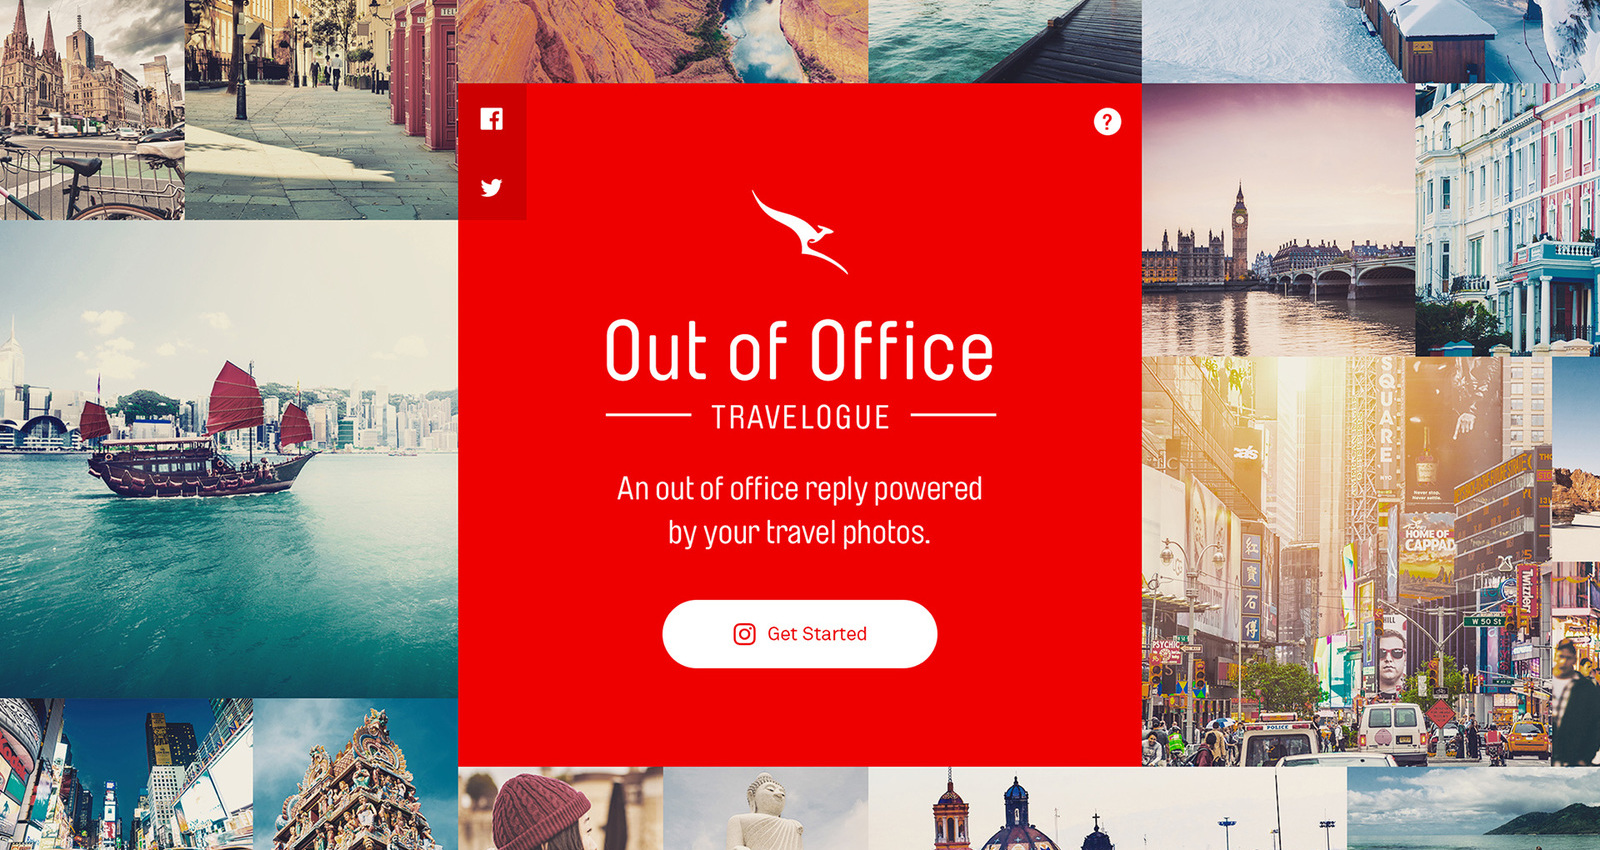 Qantas Out of Office Travelogue